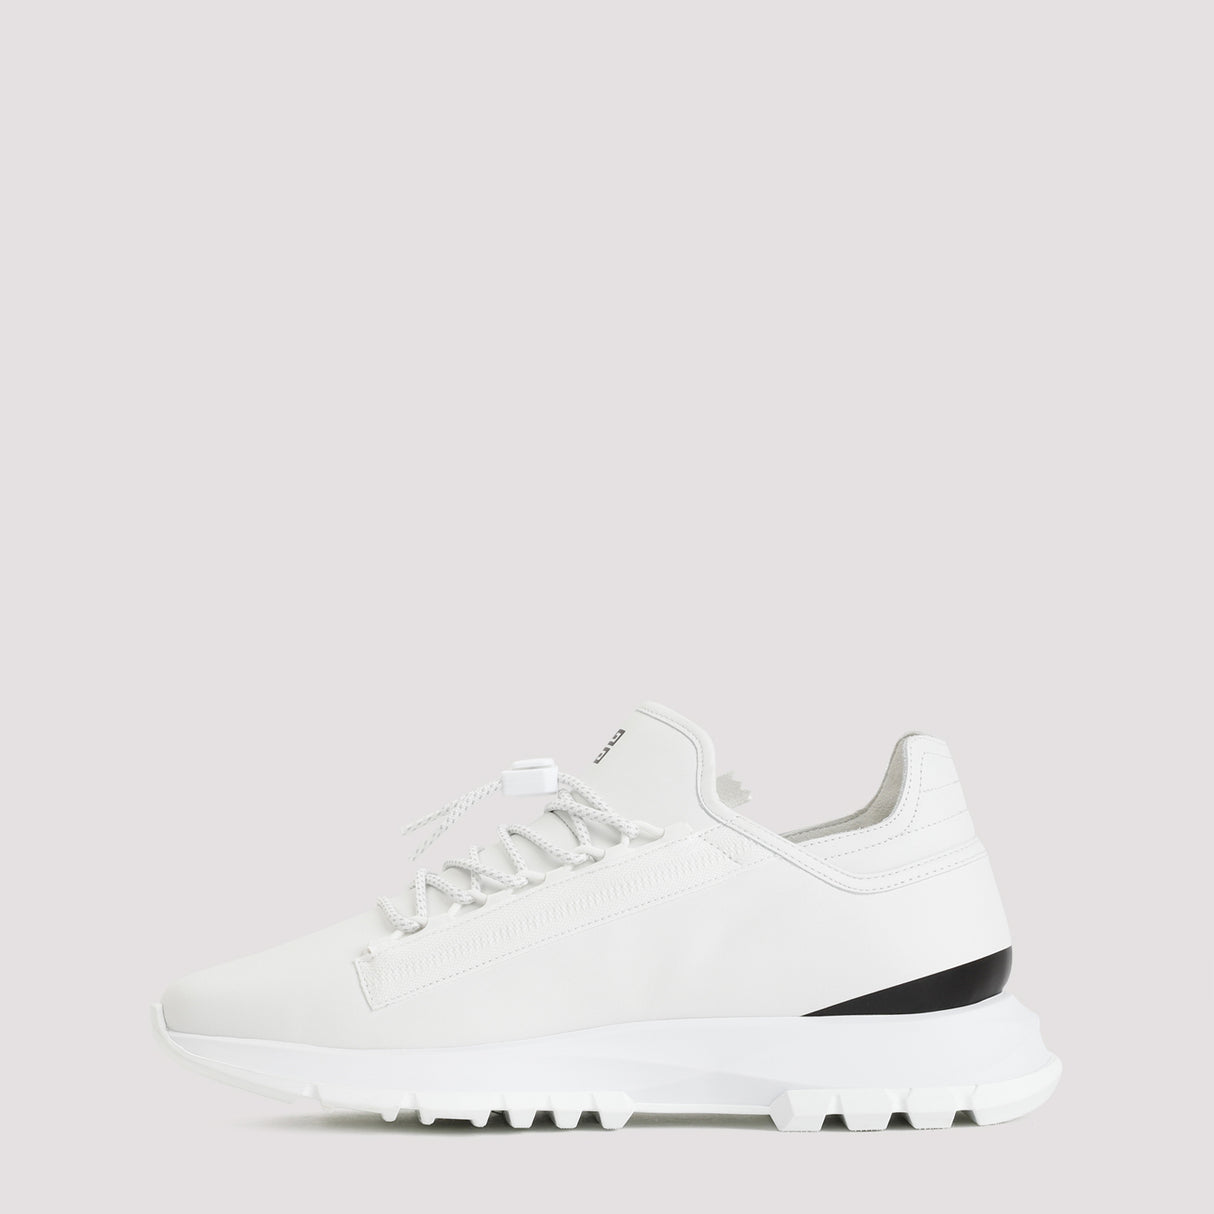 GIVENCHY Spectre Zip Runners for Men - White